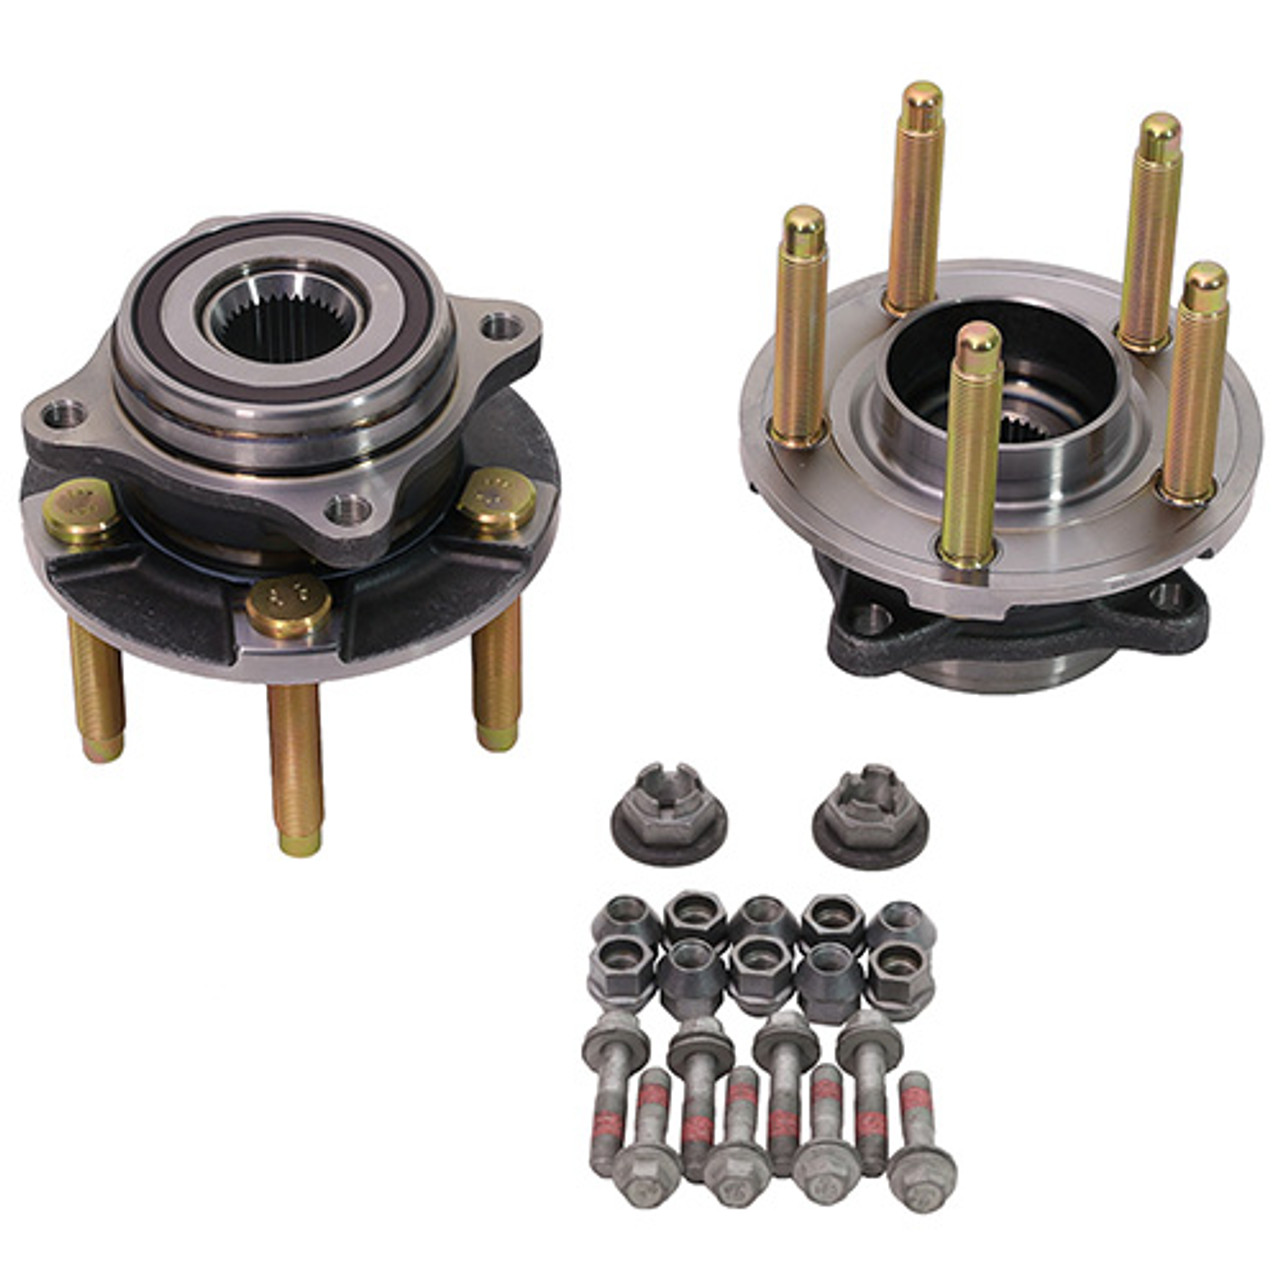 Ford Performance 2015-2019 Mustang Rear Wheel Hub Kit with ARP Studs (FRPP M-1104-B)